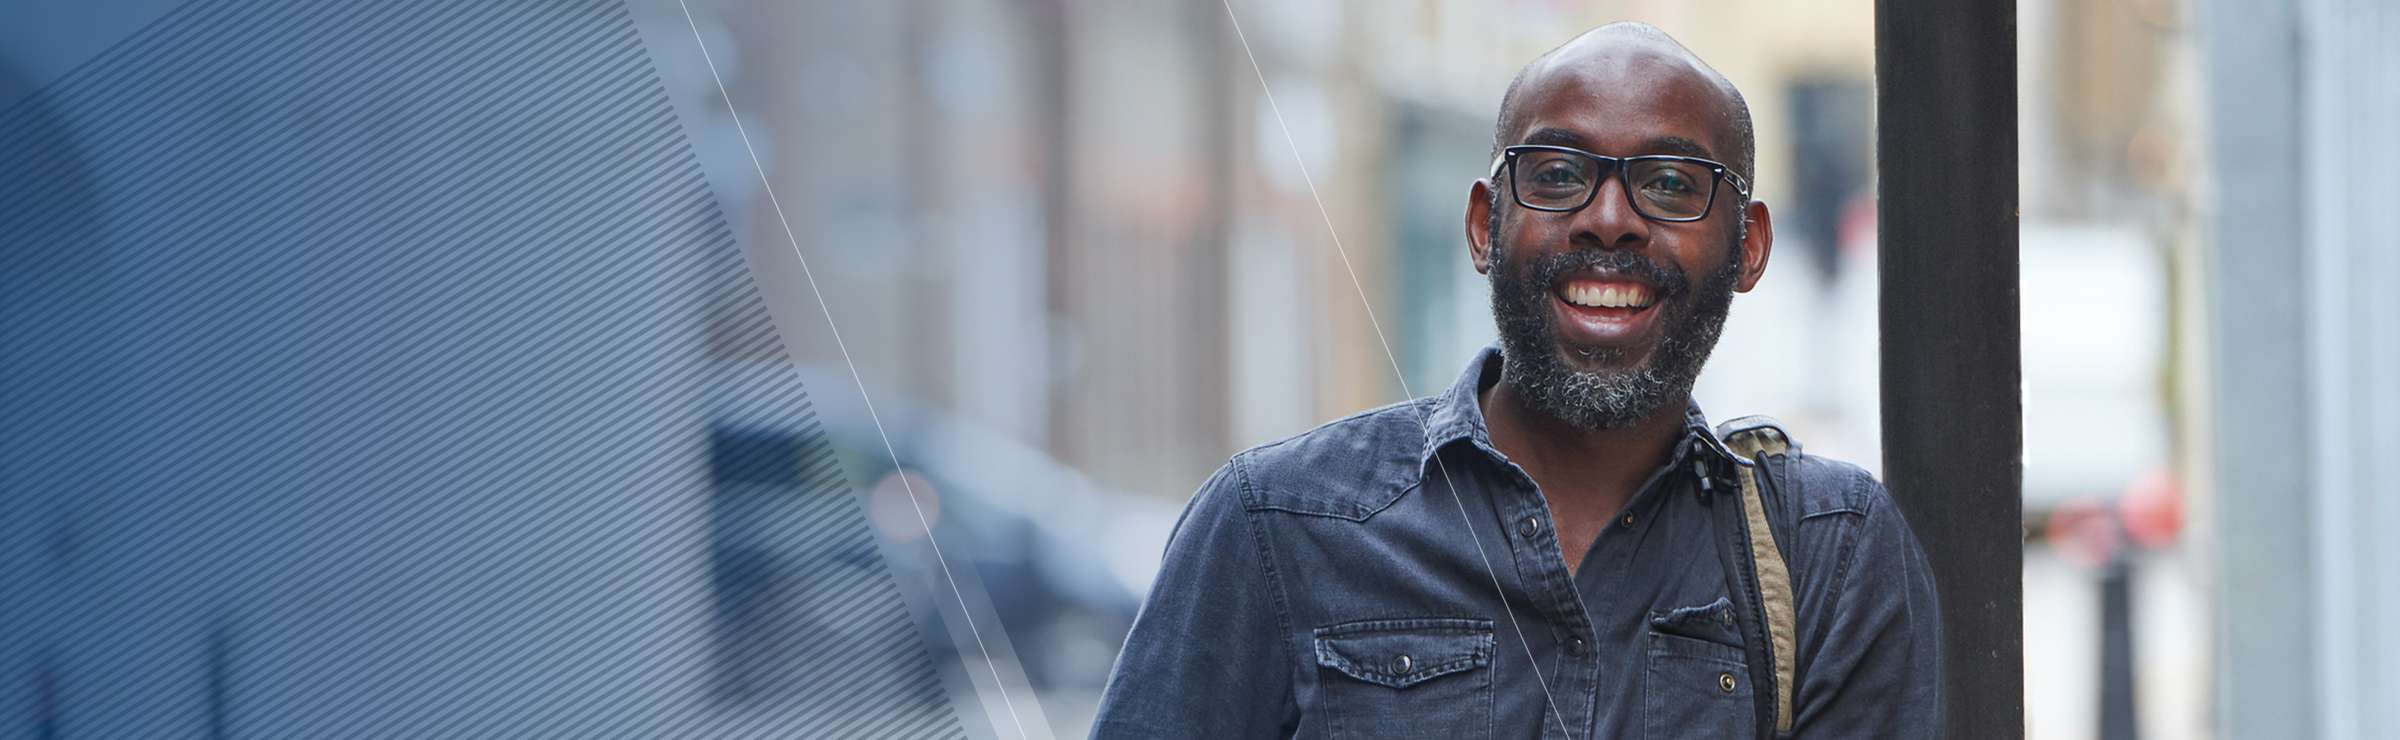 Man with beard and glasses smiling while standing outside